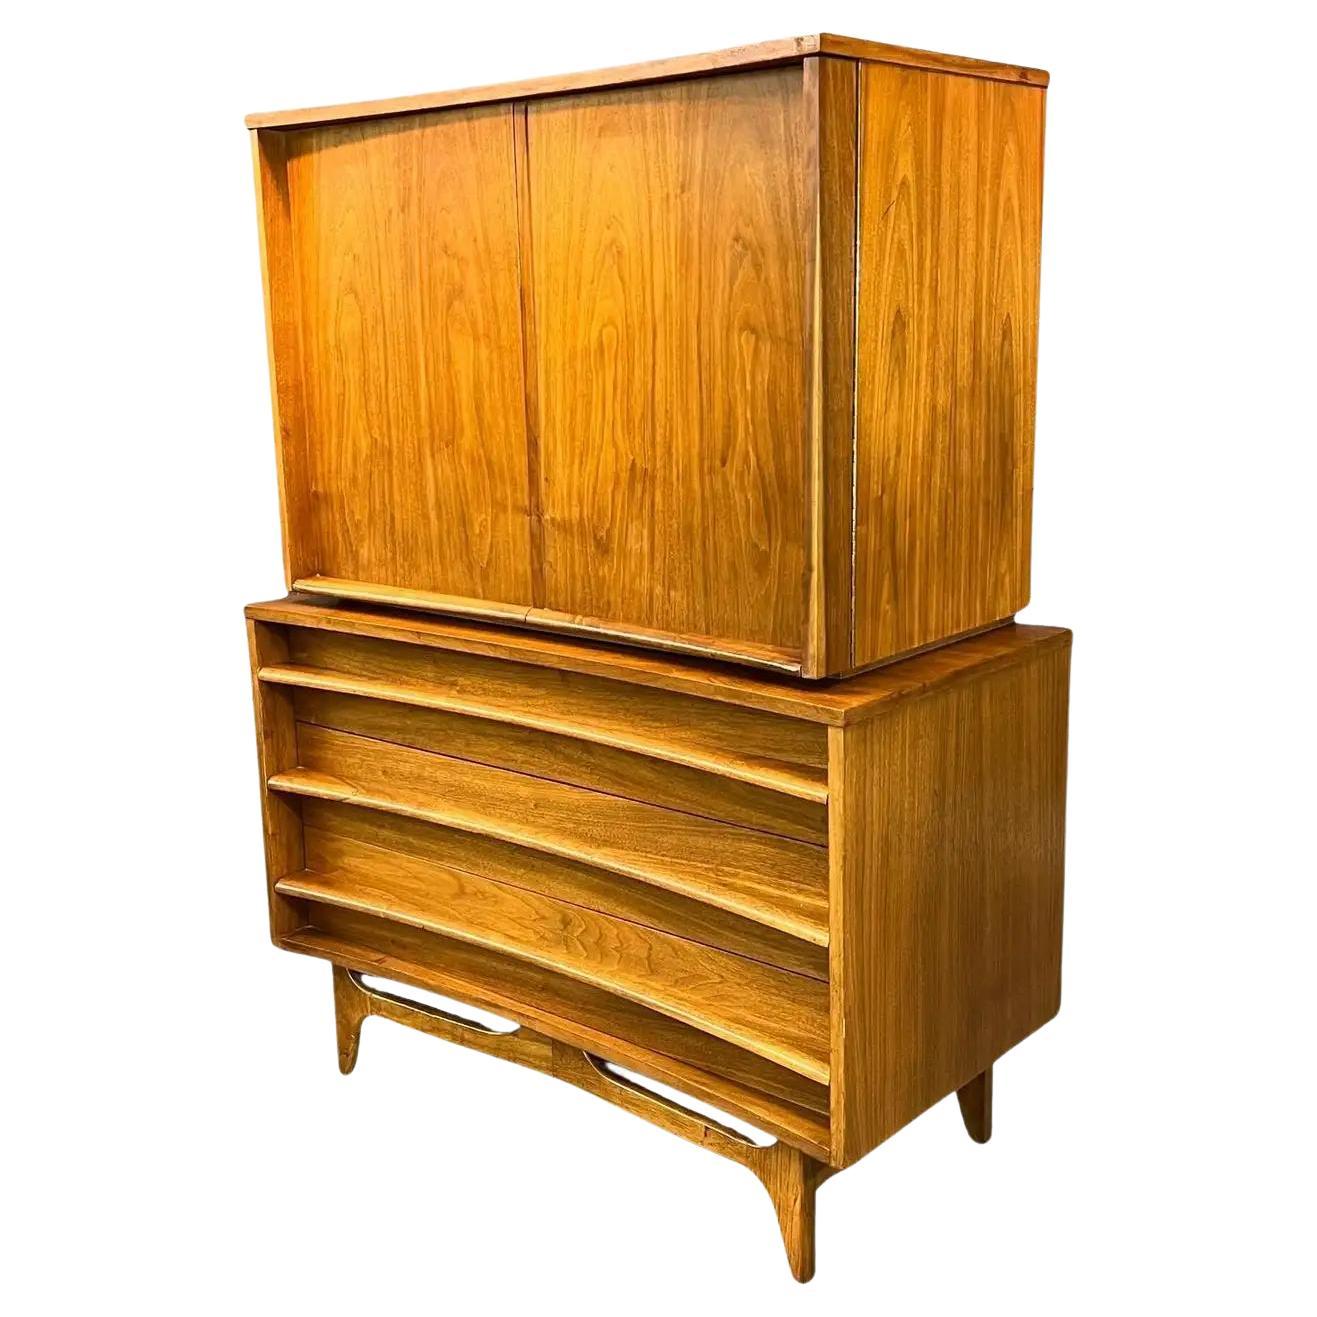 Young Manufacturing Midcentury Walnut Armoire Highboy Dresser, 1960s